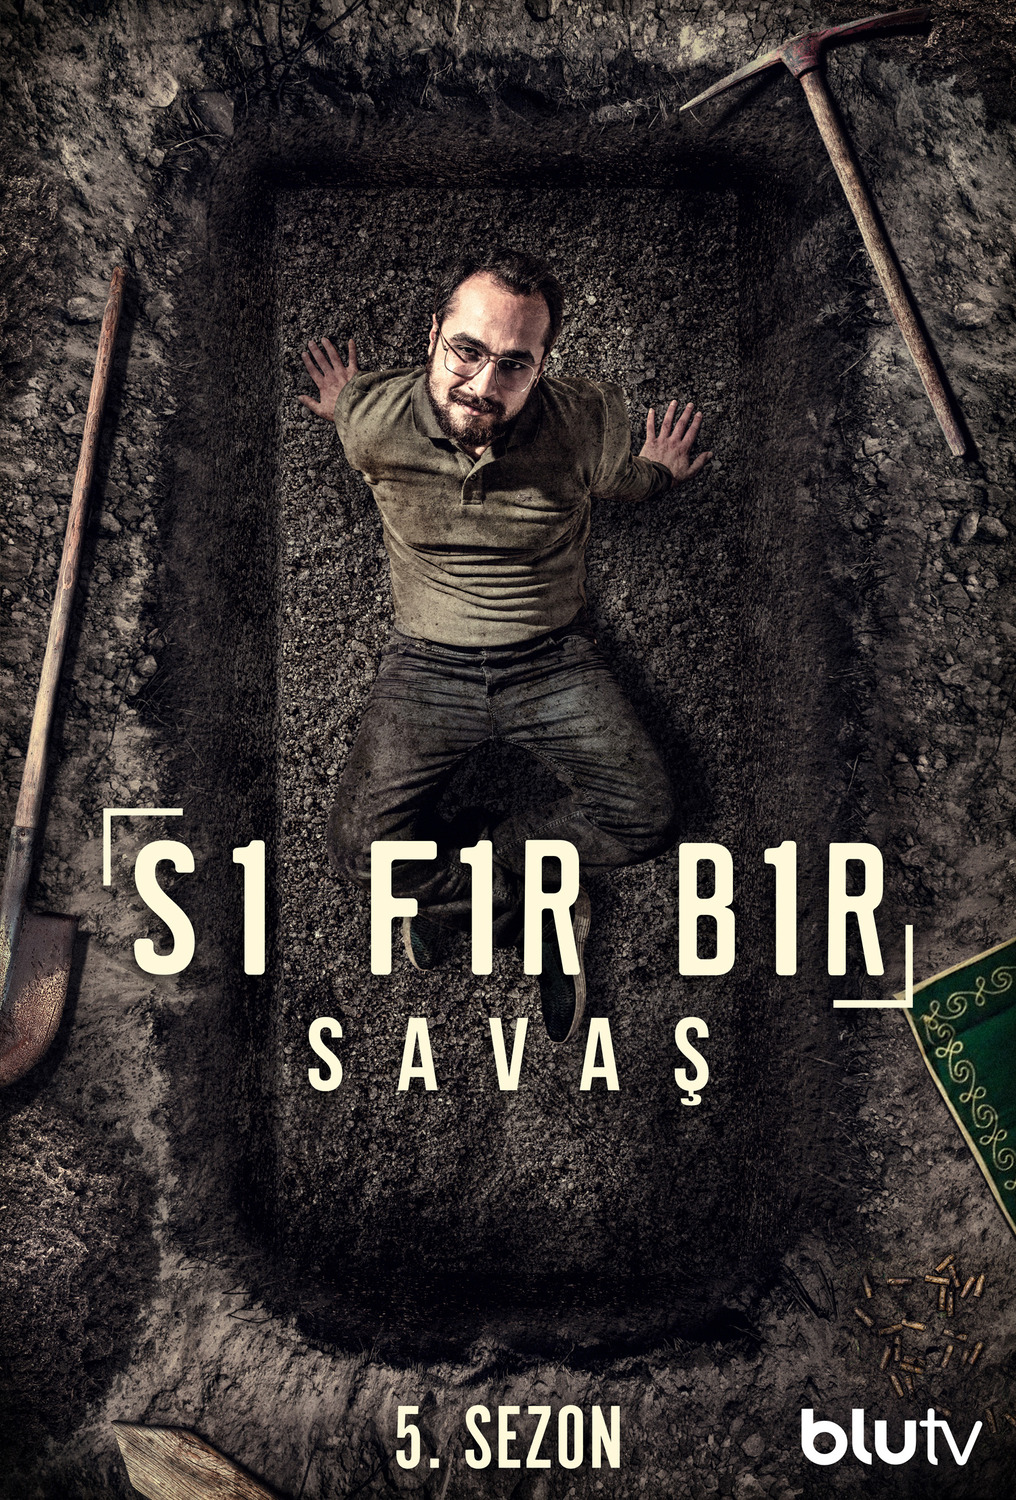 Extra Large TV Poster Image for Sifir Bir (#14 of 23)